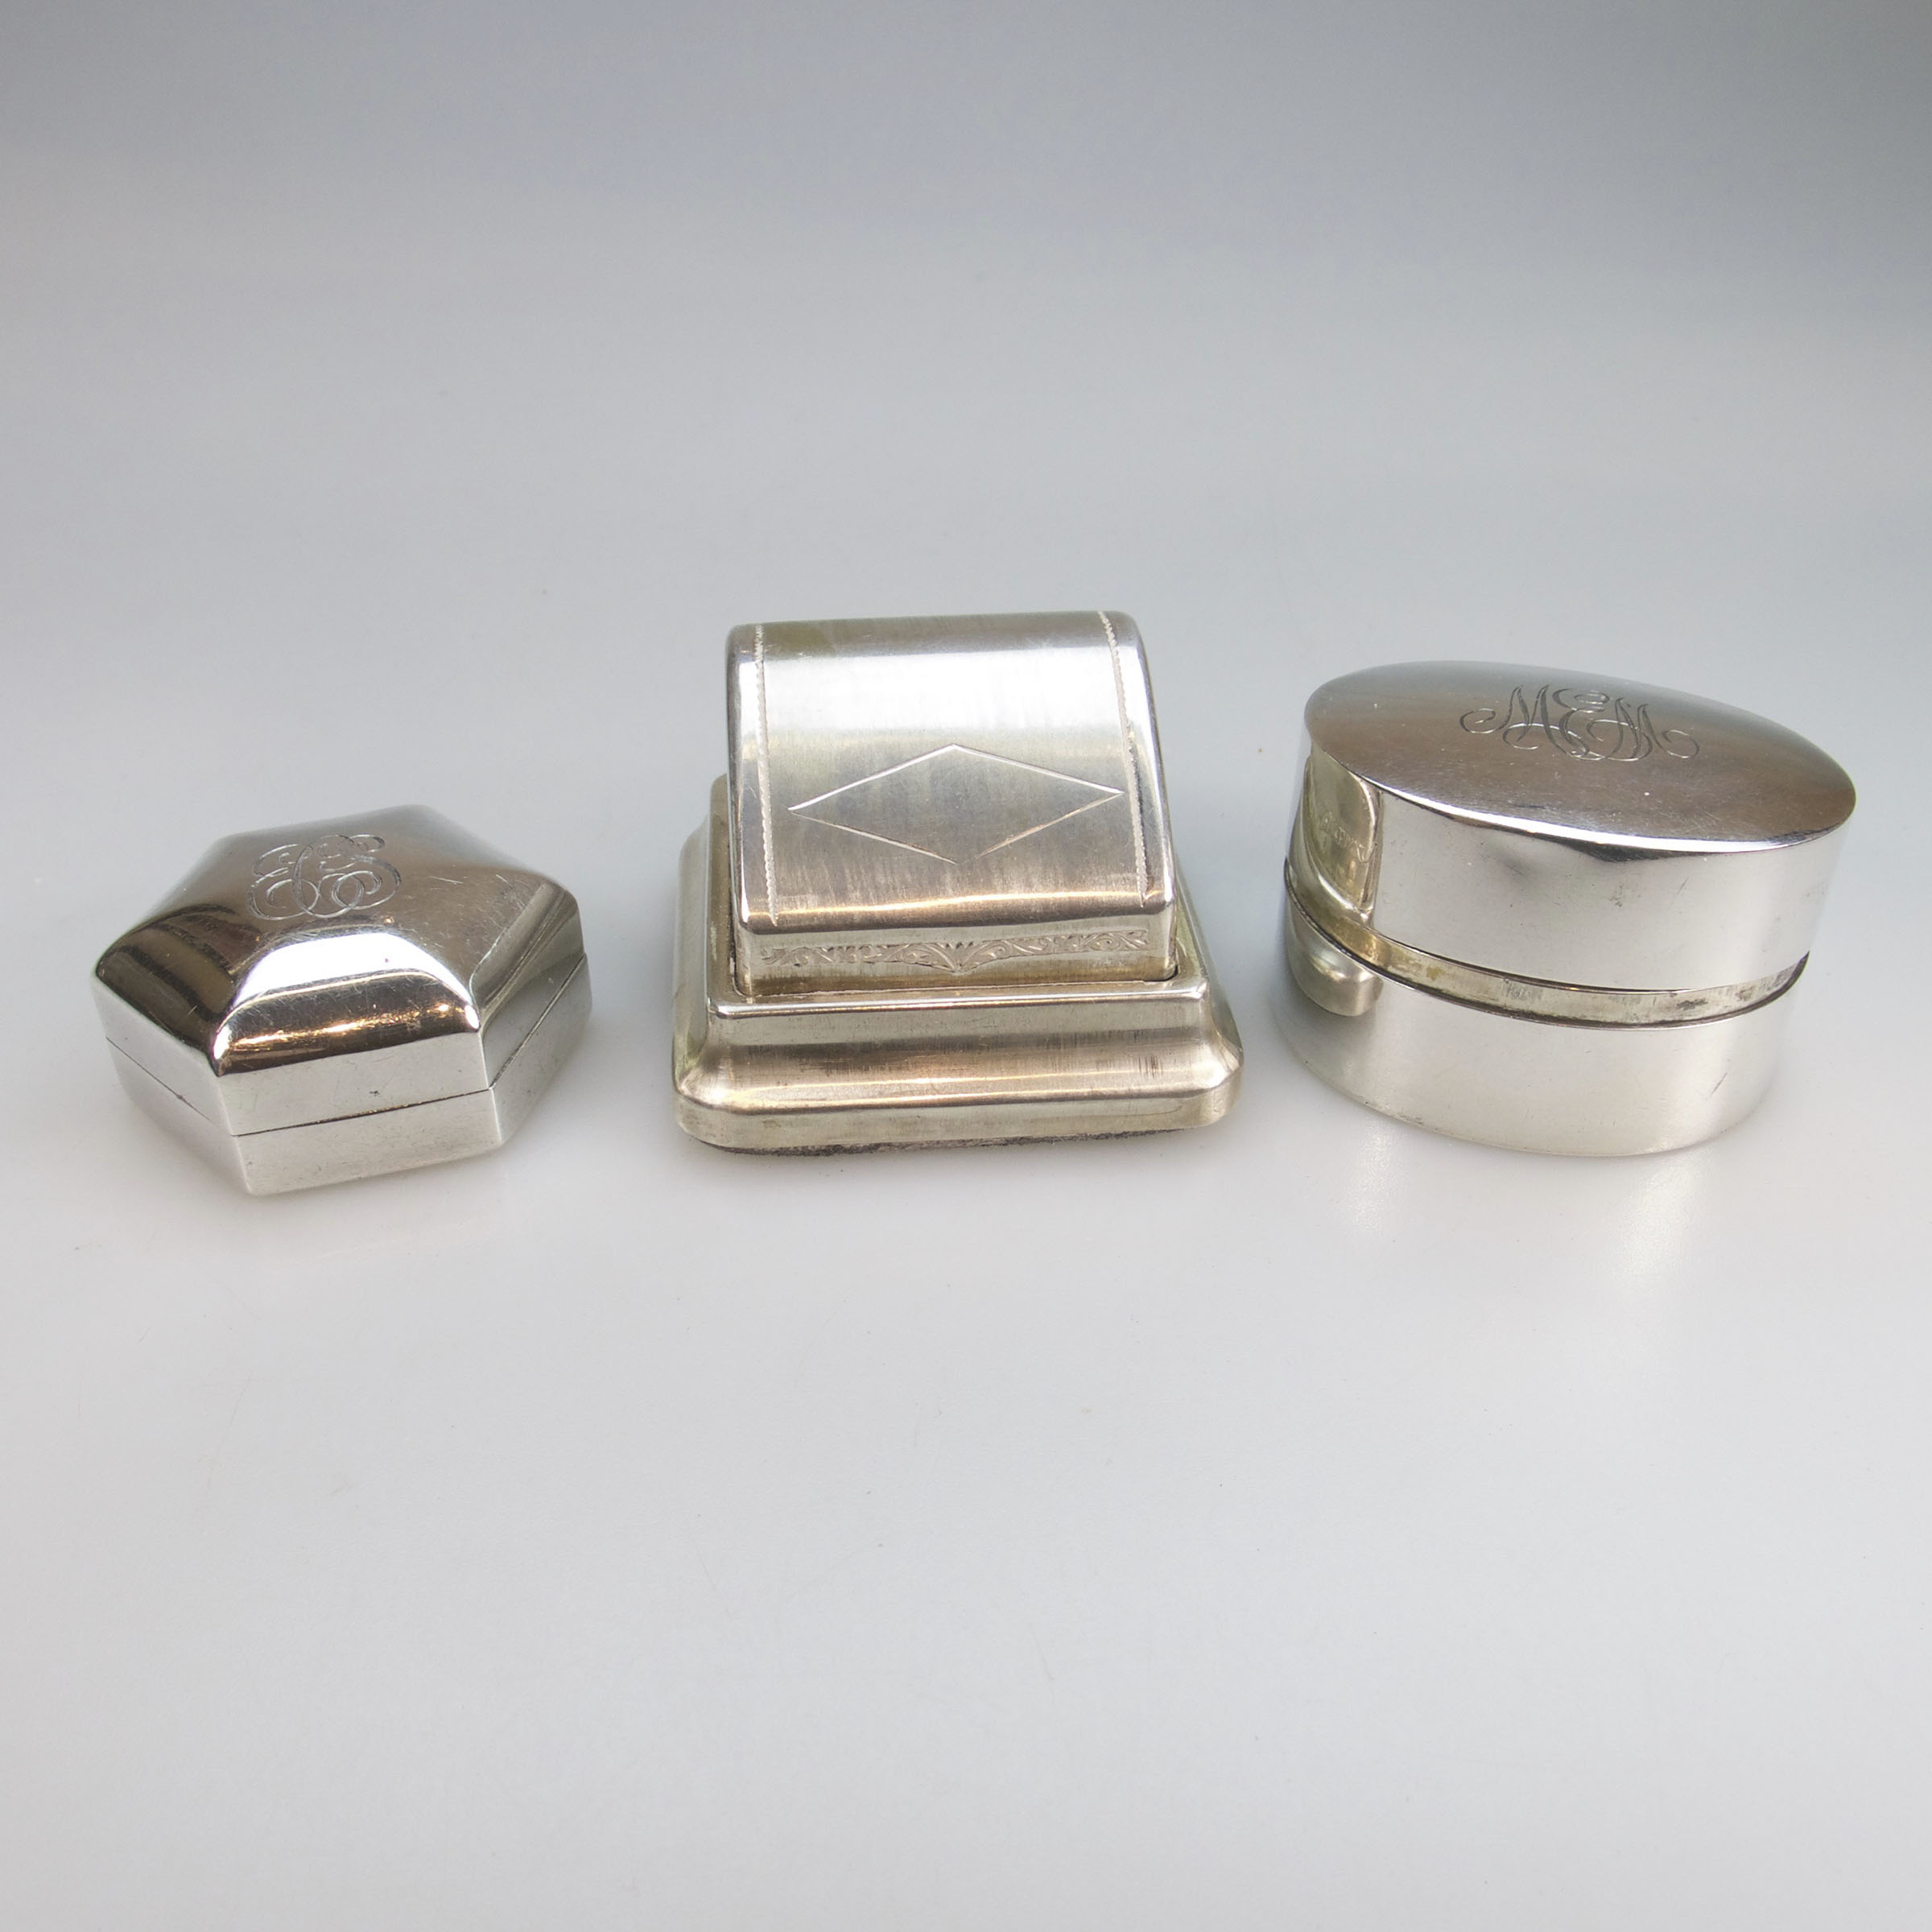 3 Sterling Silver Ring Boxes